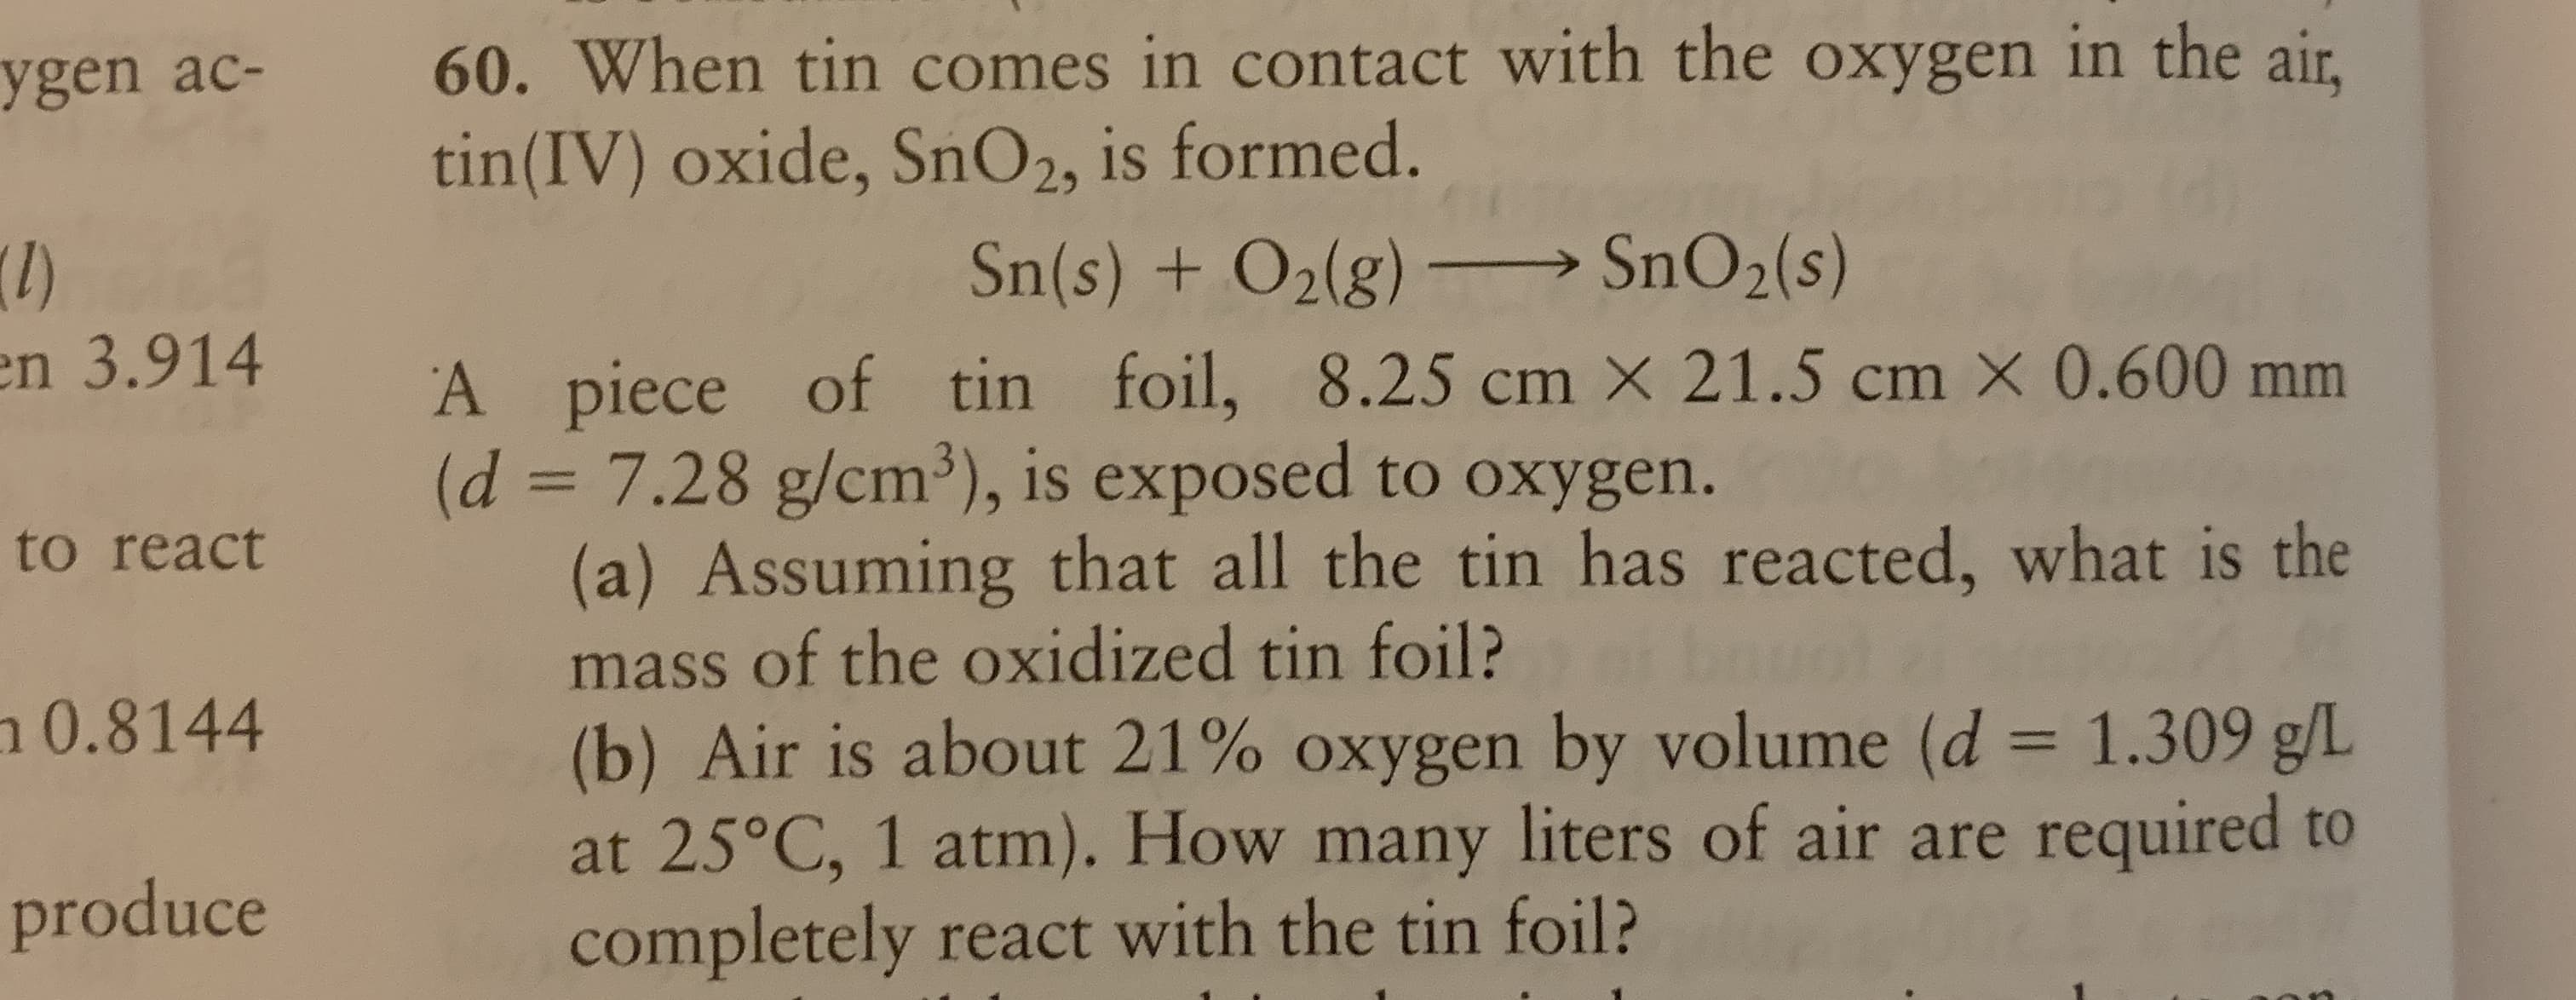 60. When tin comes in contact with the oxygen in the air,
tin(IV) oxide, SnO2, is formed.
Sn(s) + O2(g)
SNO2(s)
A piece of tin foil, 8.25 cm × 21.5 cm × 0.600 mm
(d = 7.28 g/cm³), is exposed to oxygen.
(a) Assuming that all the tin has reacted, what is the
mass of the oxidized tin foil?
(b) Air is about 21% oxygen by volume (d = 1.309 g/L
at 25°C, 1 atm). How many liters of air are required to
completely react with the tin foil?
|D
